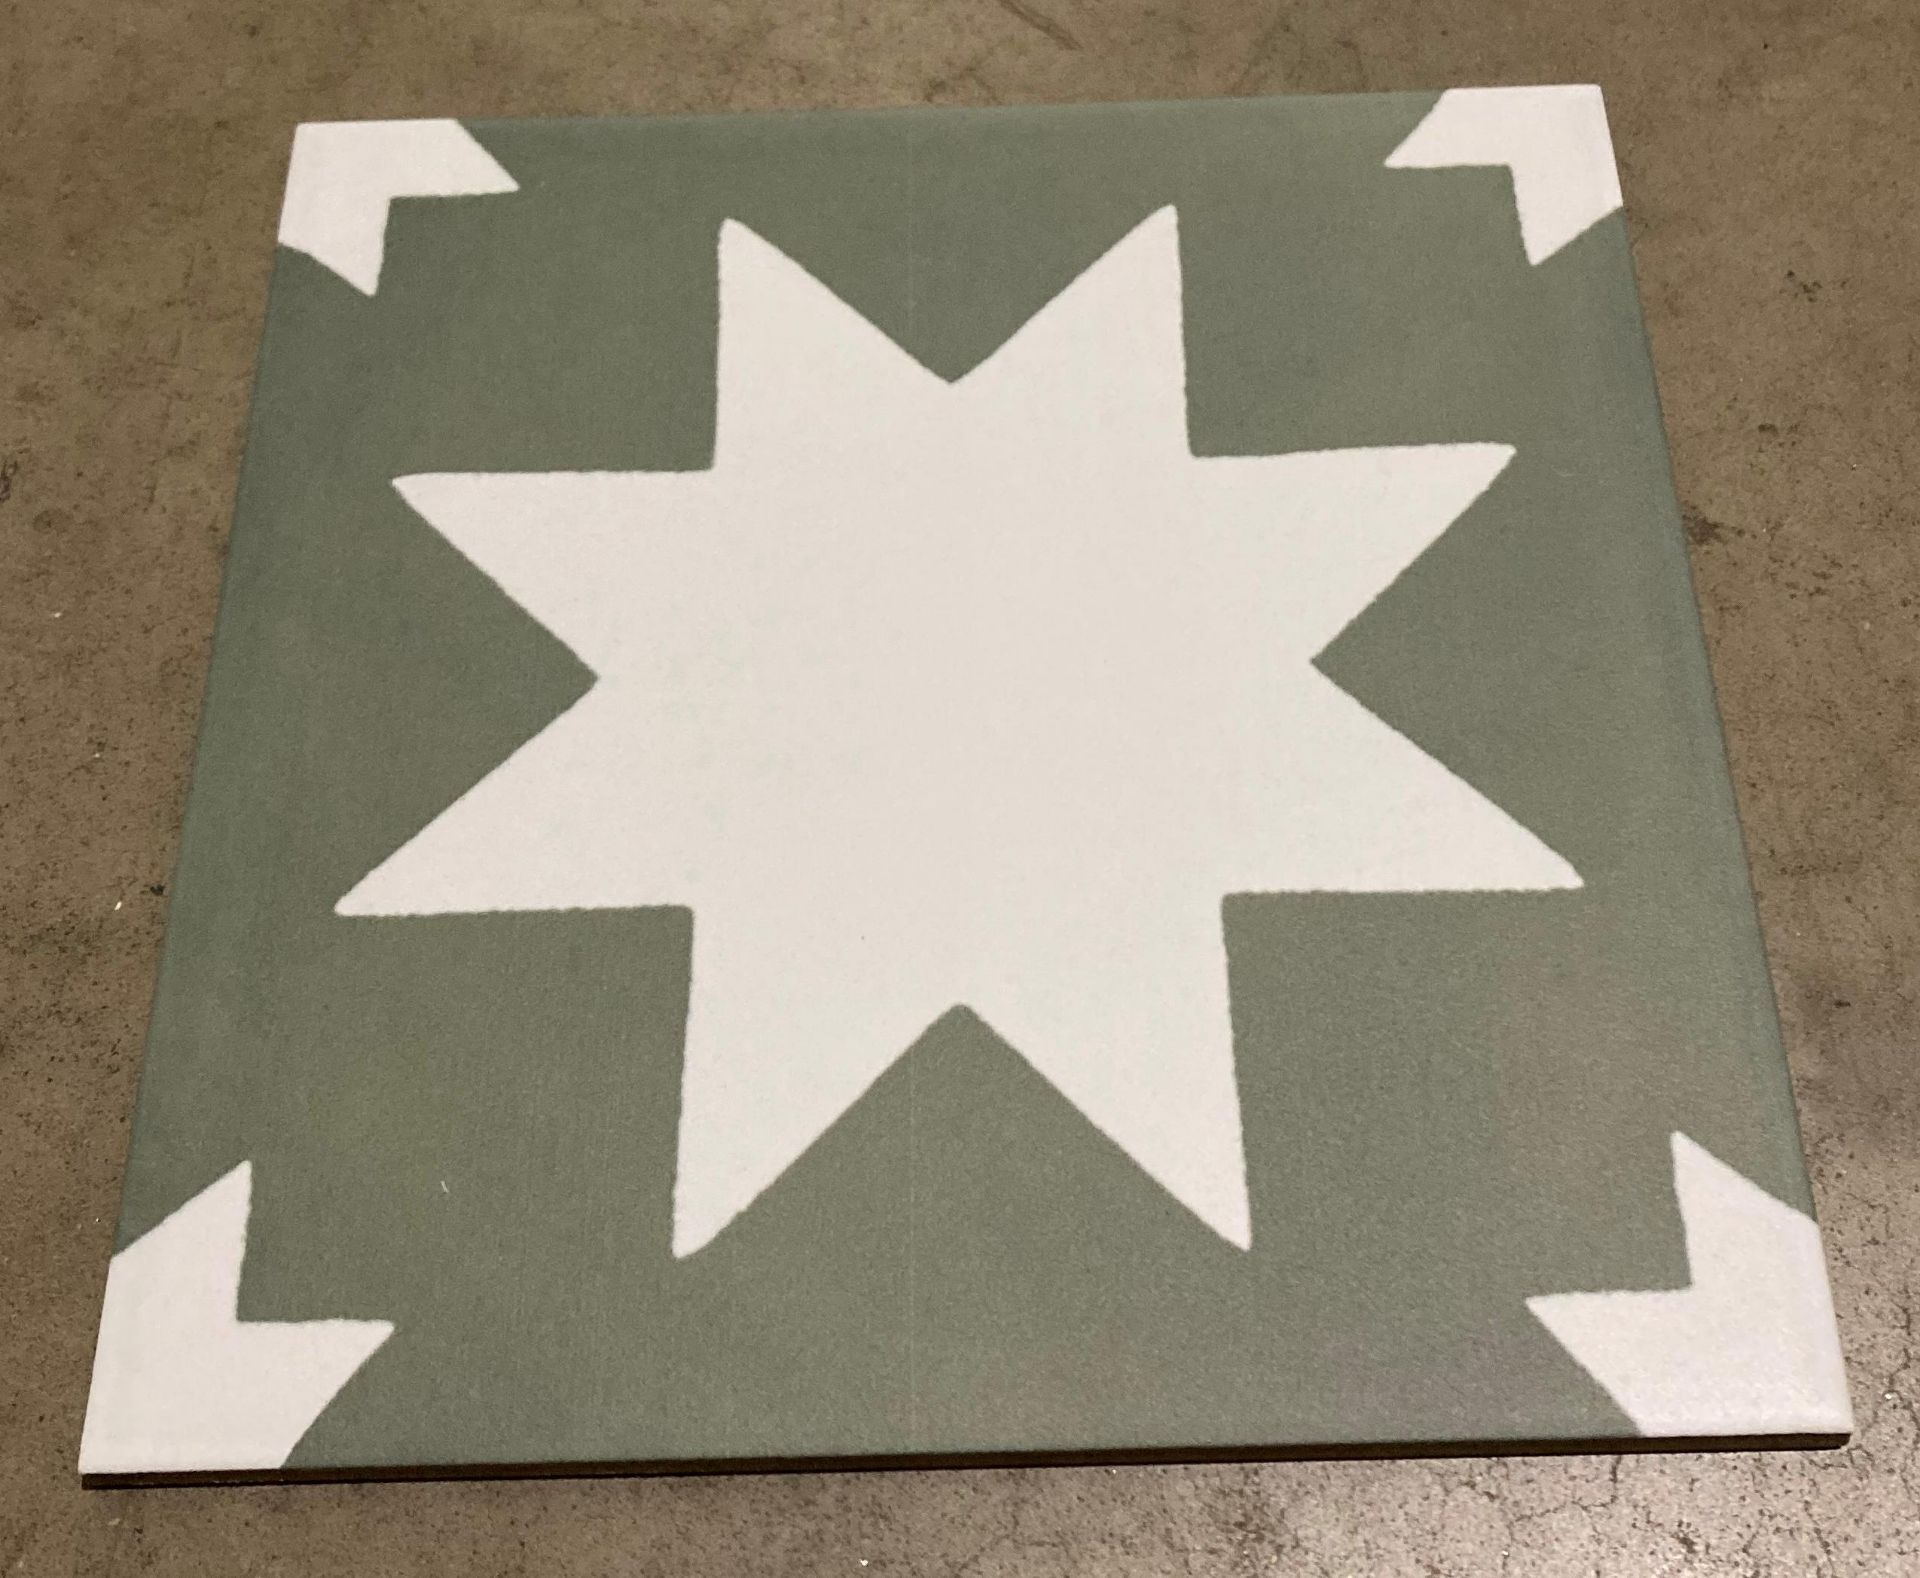 13 x packs of 25 20cm star design ceramic wall tiles in green and off white (saleroom location: QL - Image 2 of 2